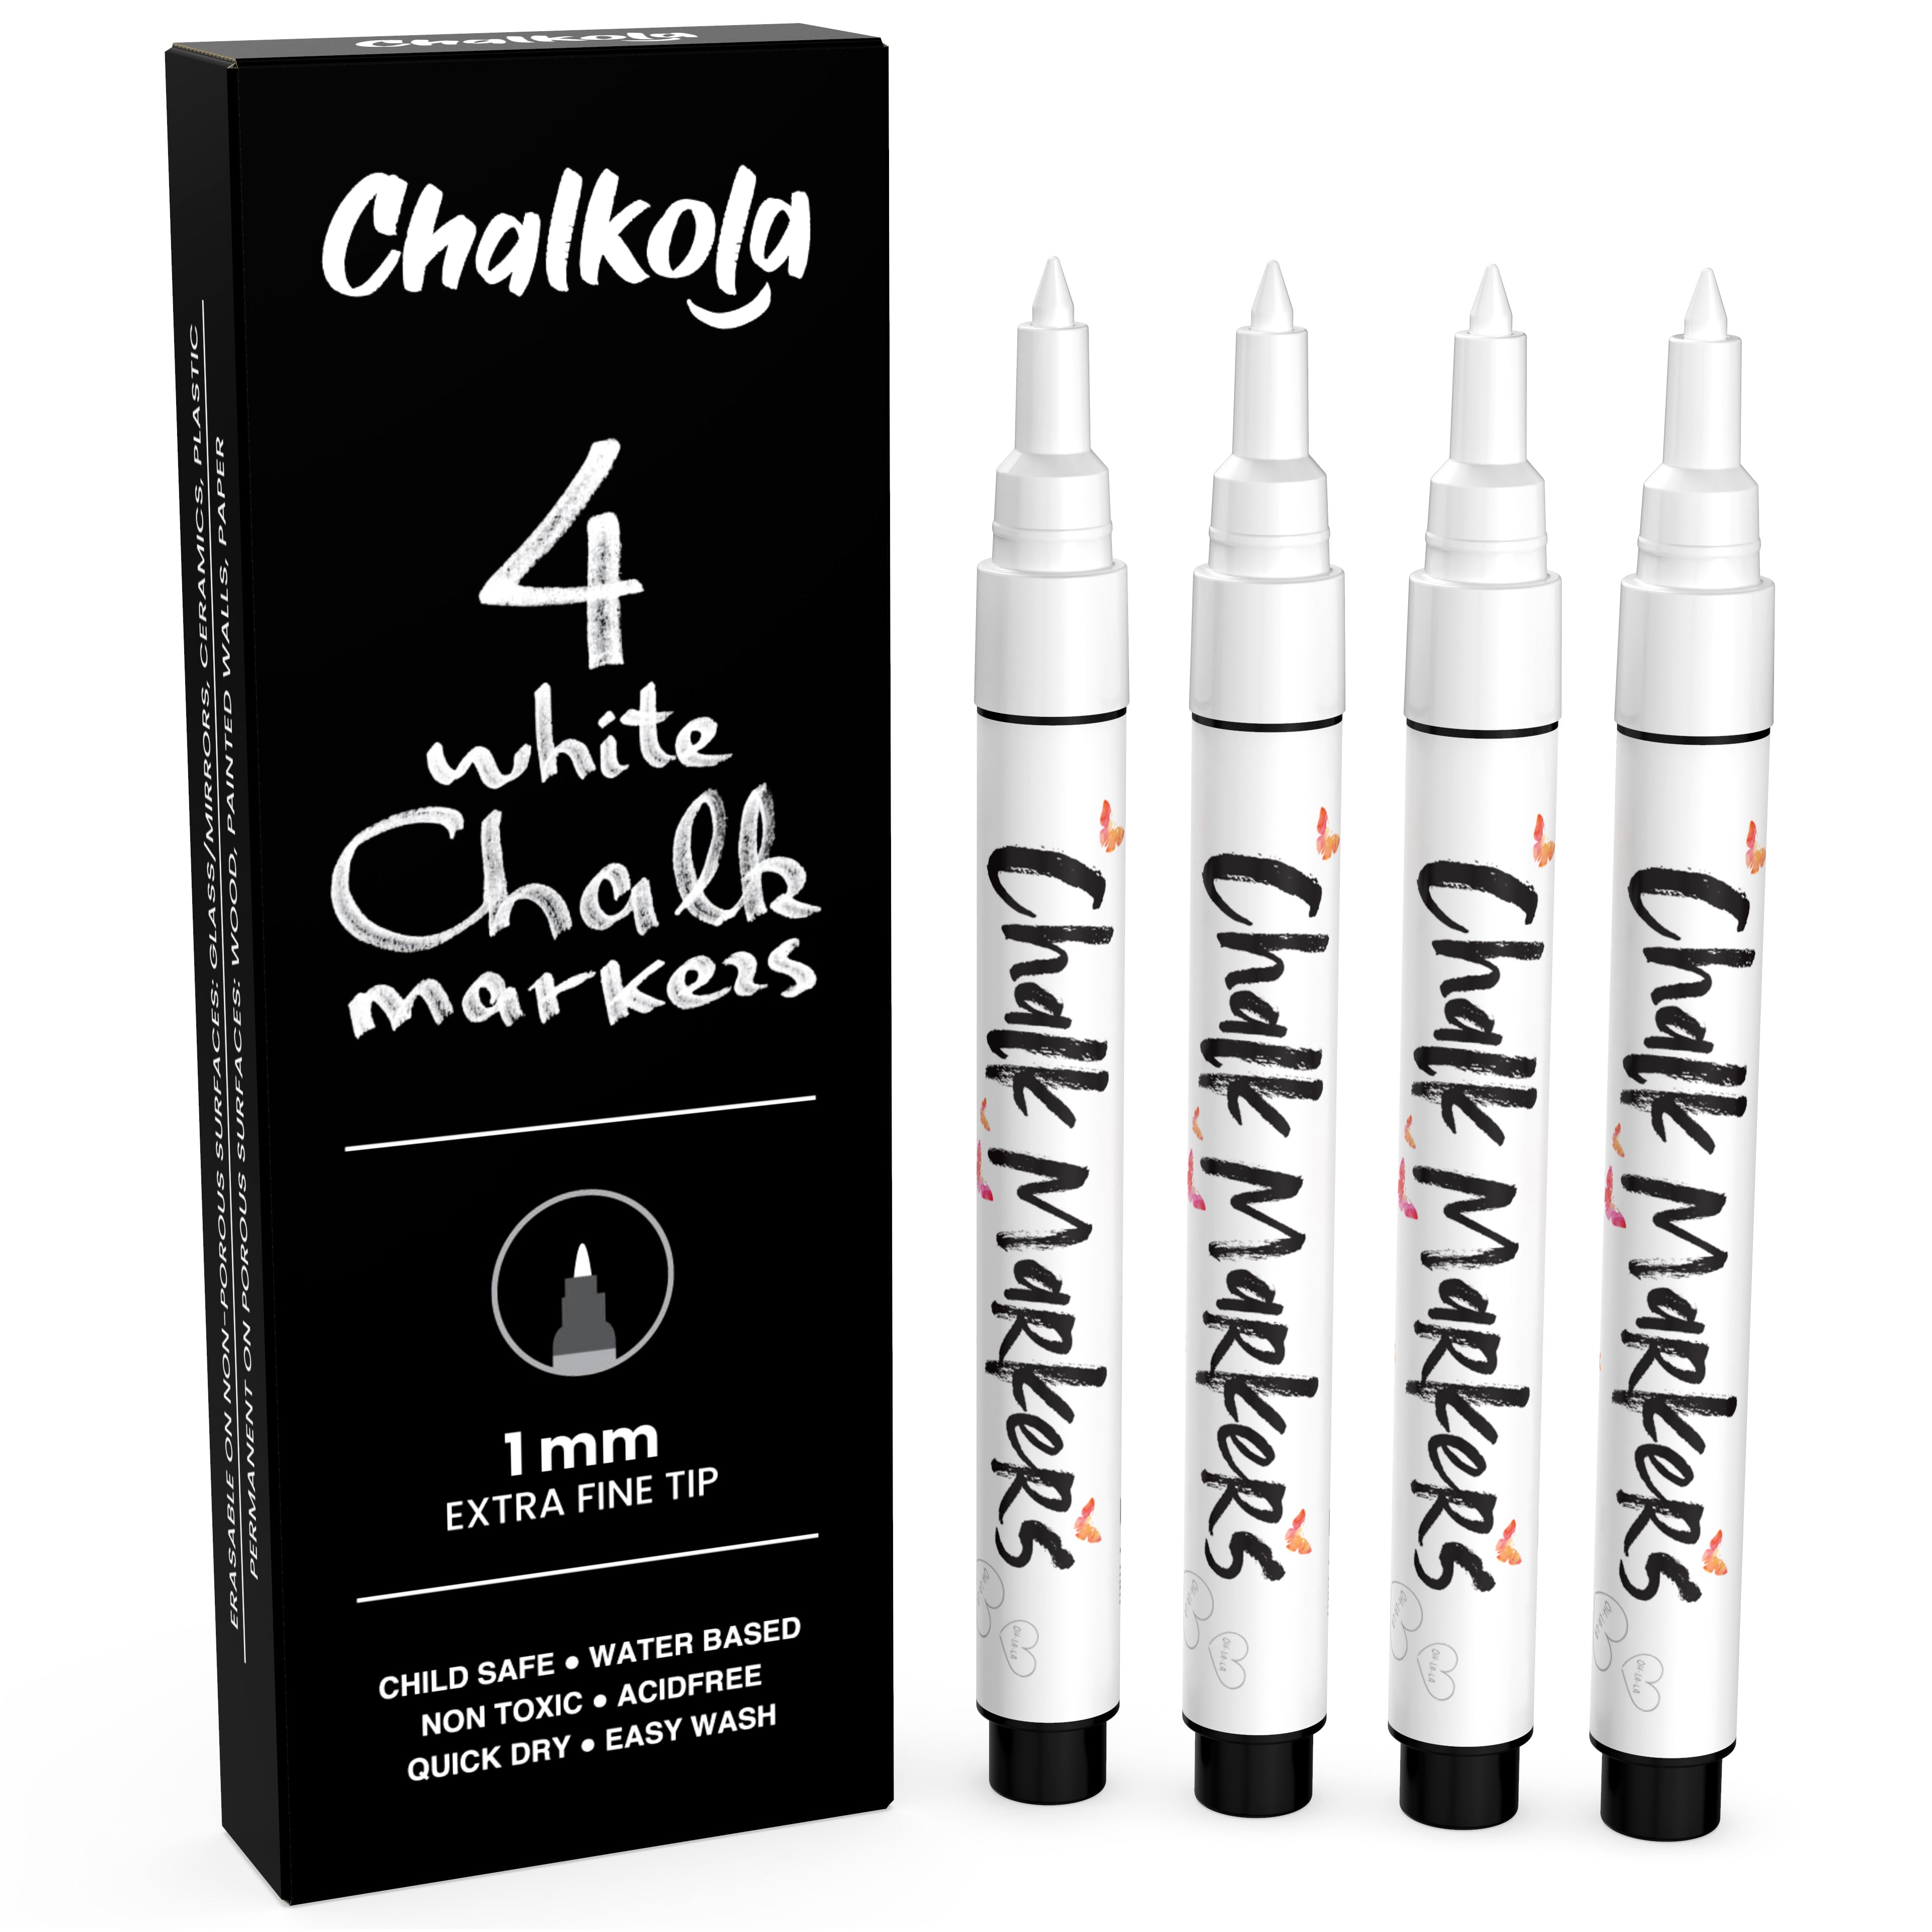 How To Use Chalkola Chalk Markers [Tutorial] 